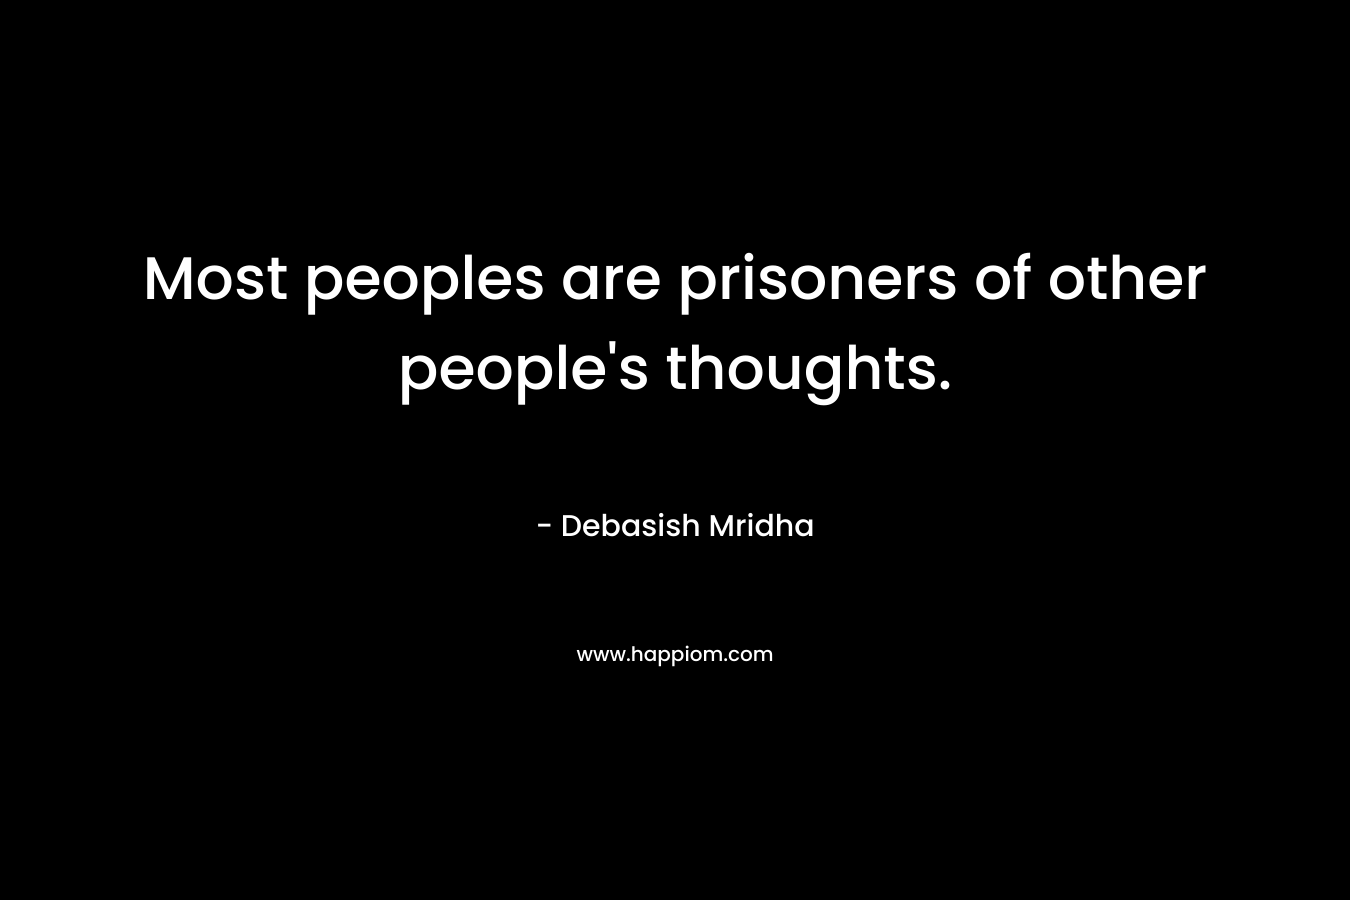 Most peoples are prisoners of other people’s thoughts. – Debasish Mridha